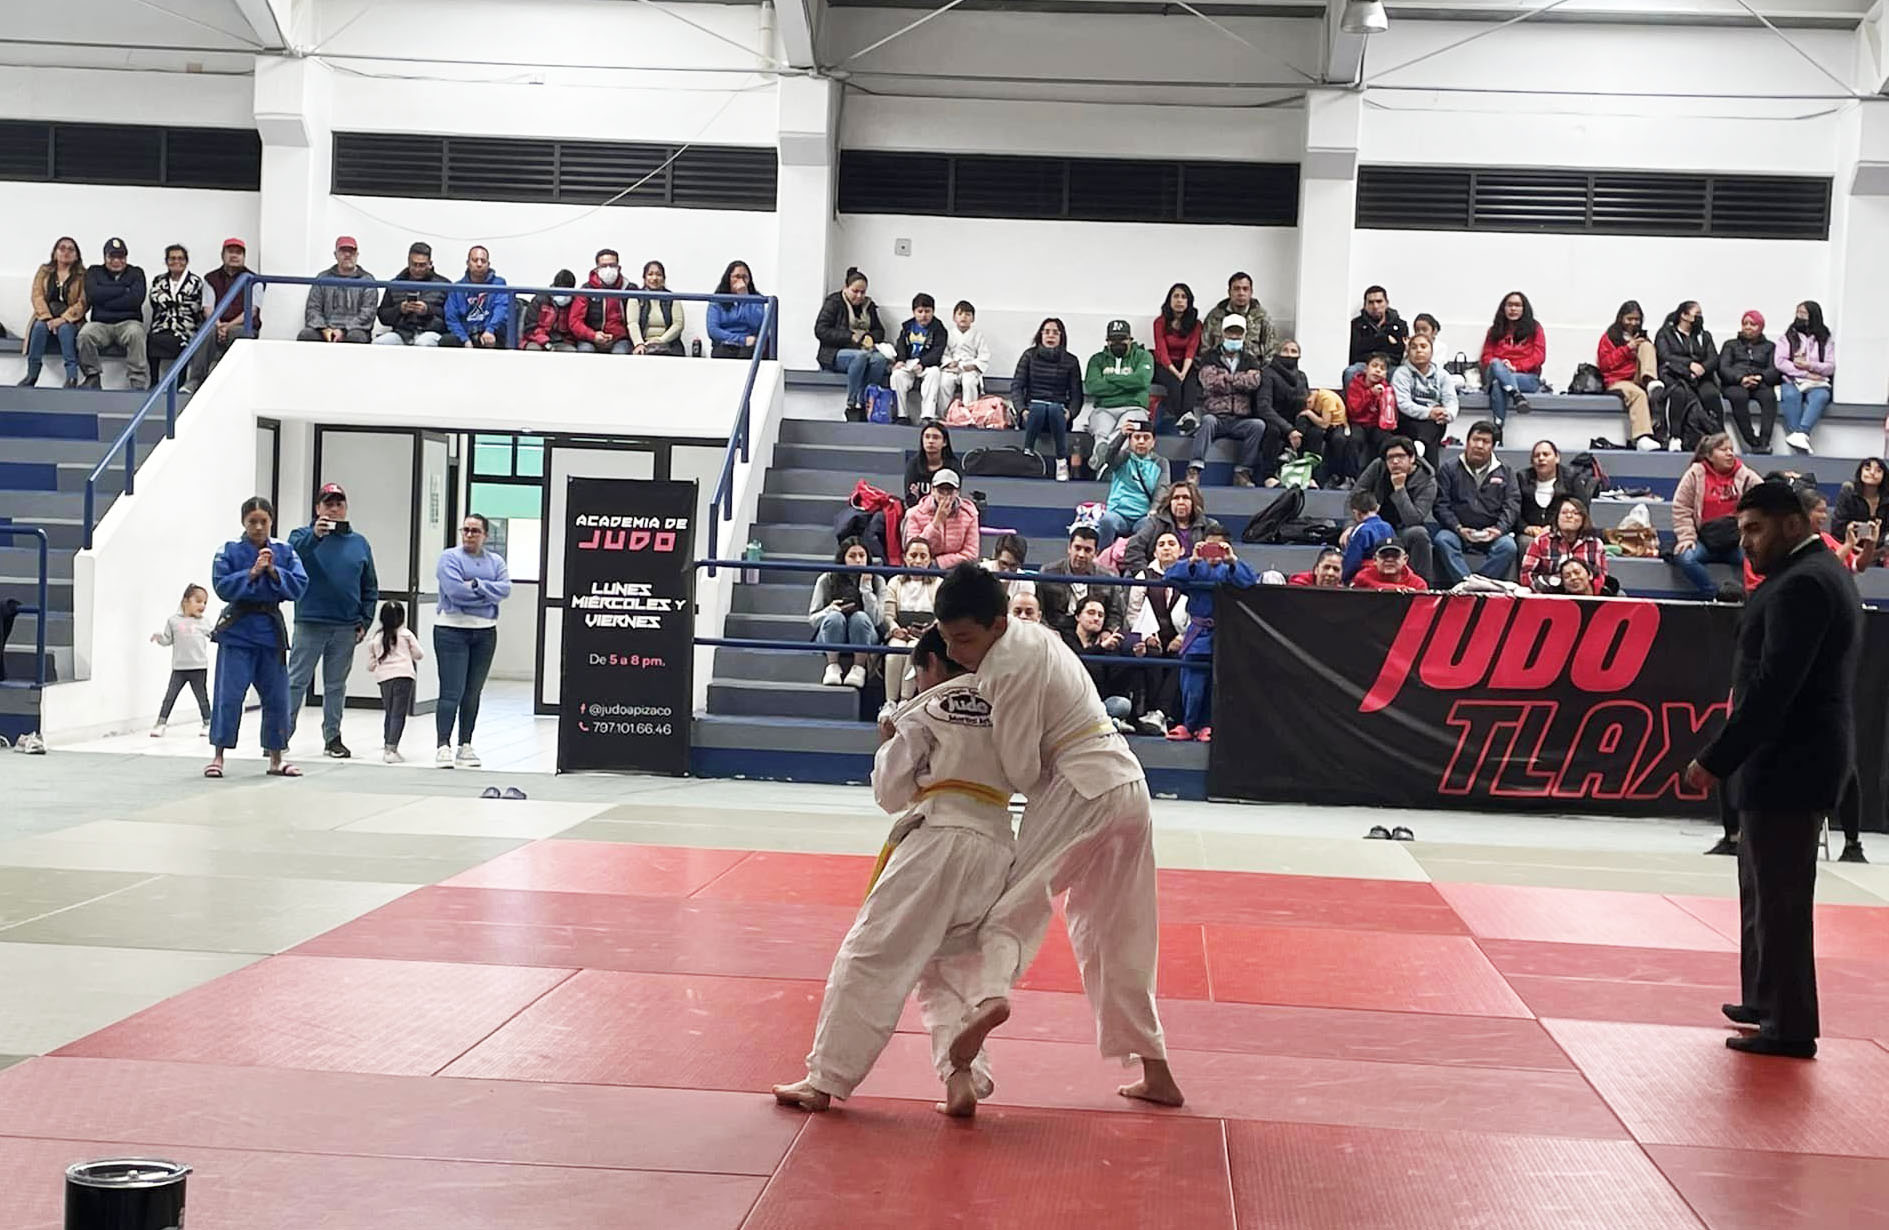 Preparations Underway for Selective State Championship in Judo Towards